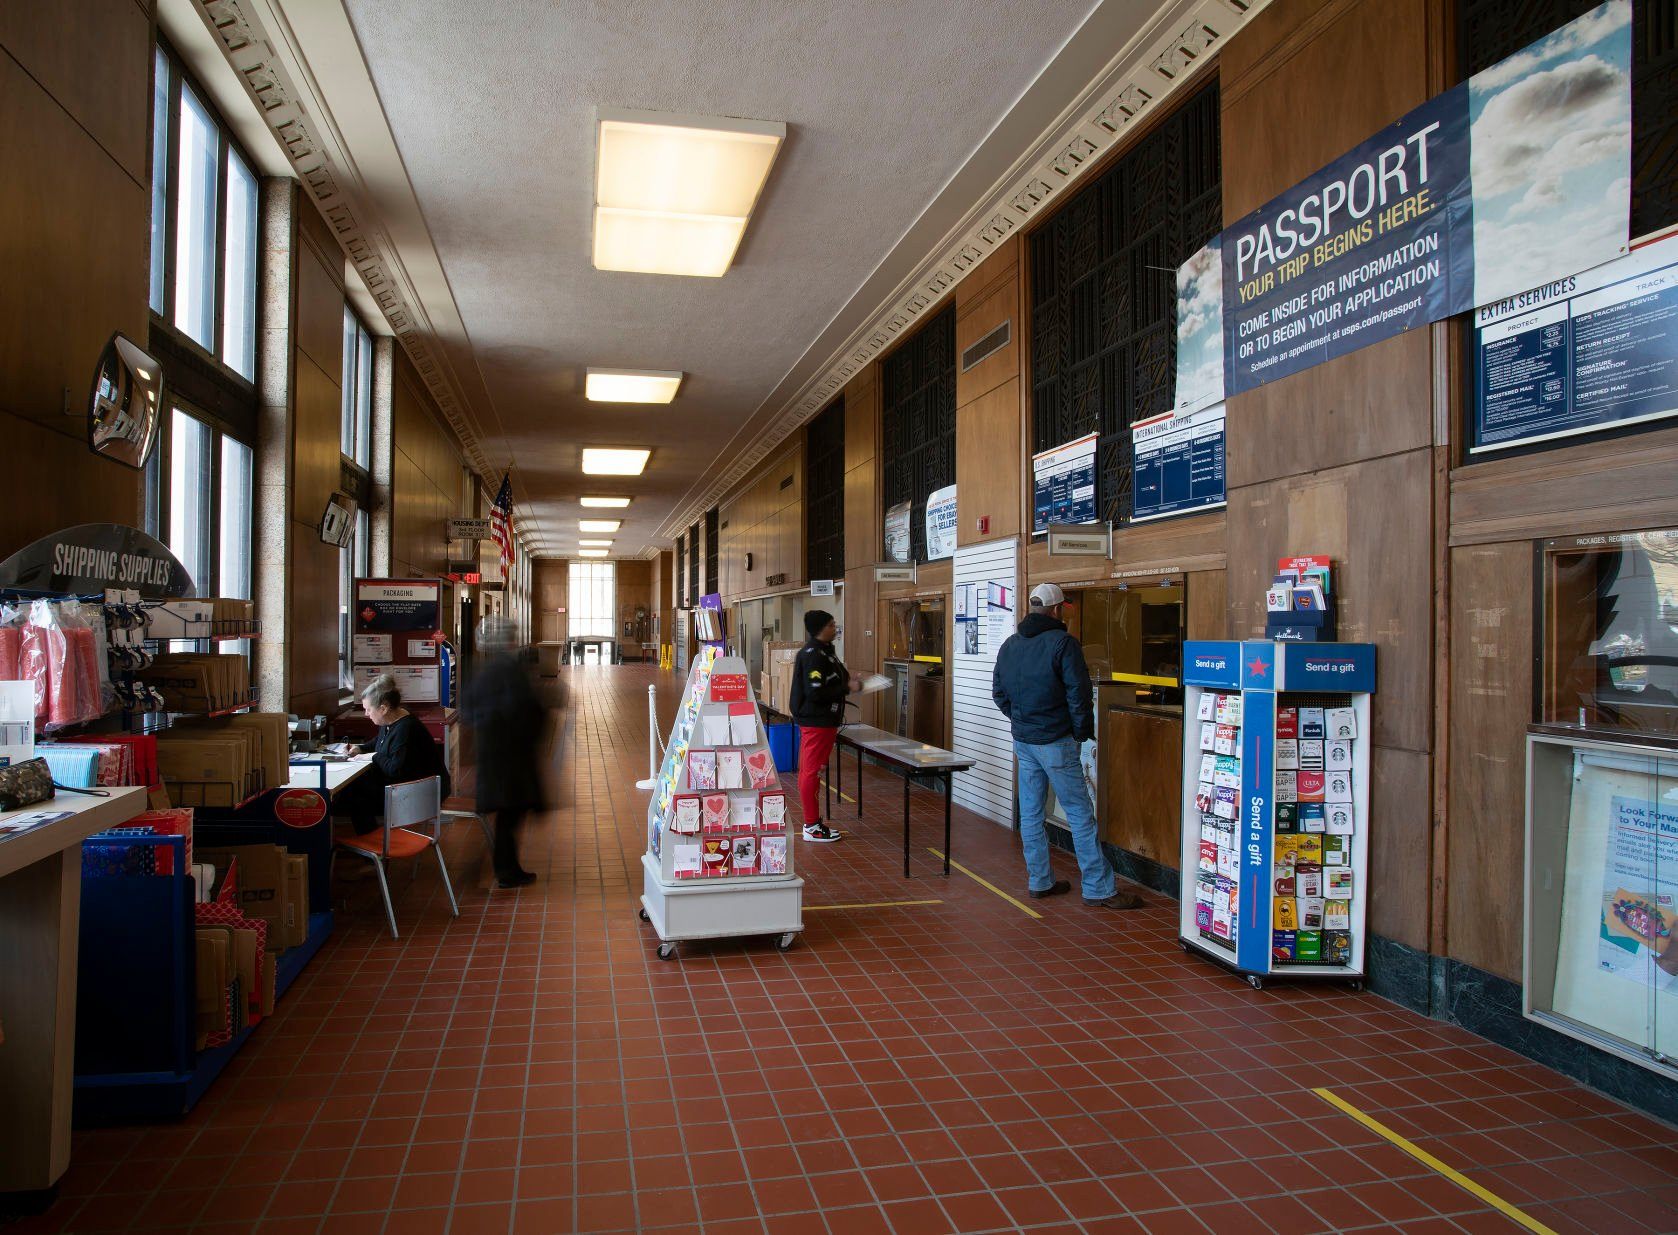 Customers stand in the lobby of the post office located inside the historic Federal Building in Dubuque on Wednesday, Feb. 23, 2022.    PHOTO CREDIT: Stephen Gassman